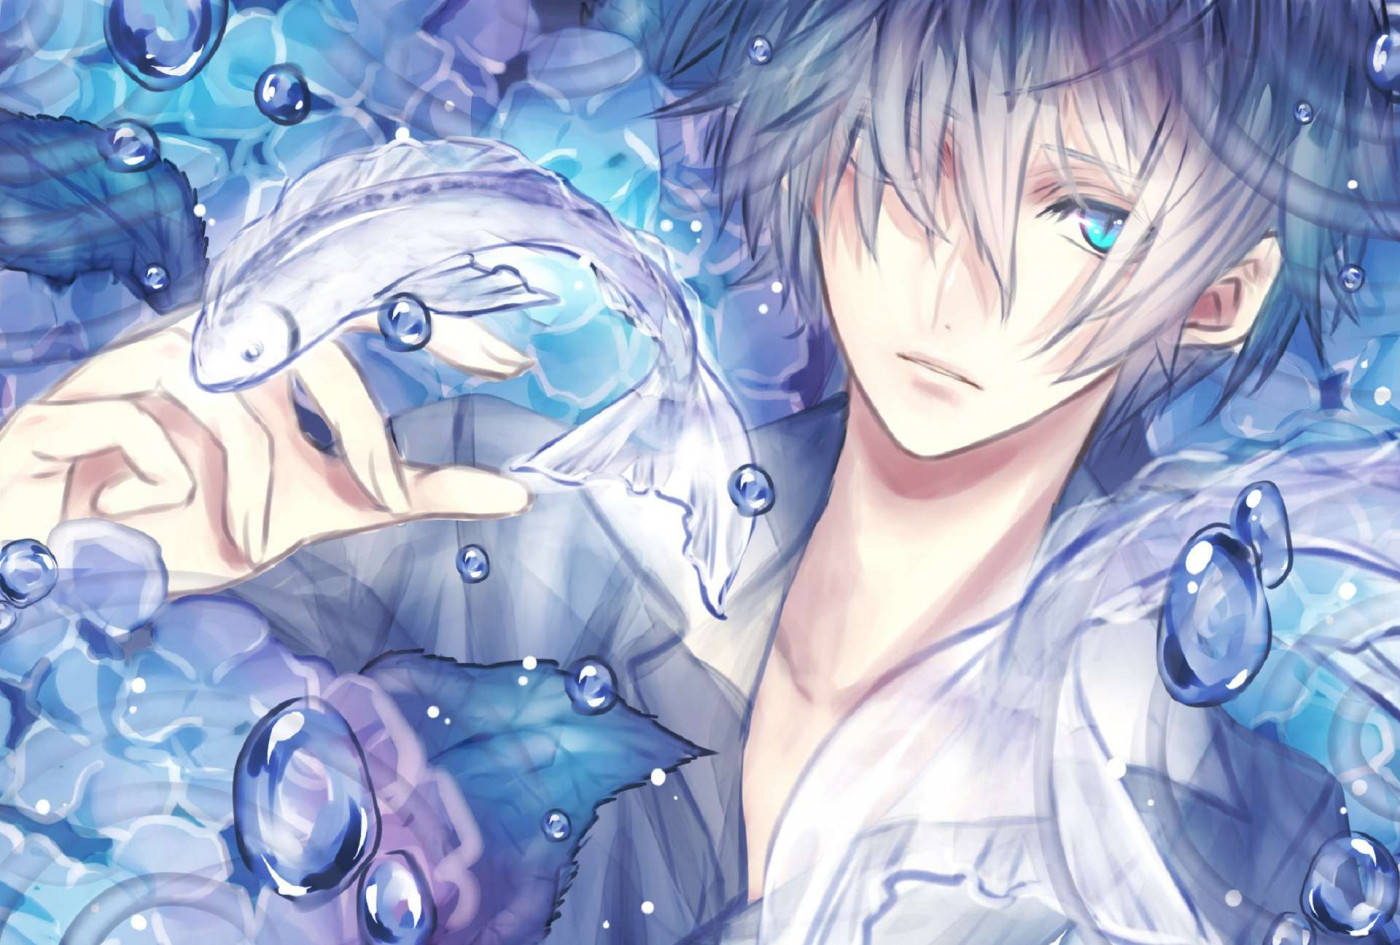 Anime Blue Boy In The Waters Wallpaper